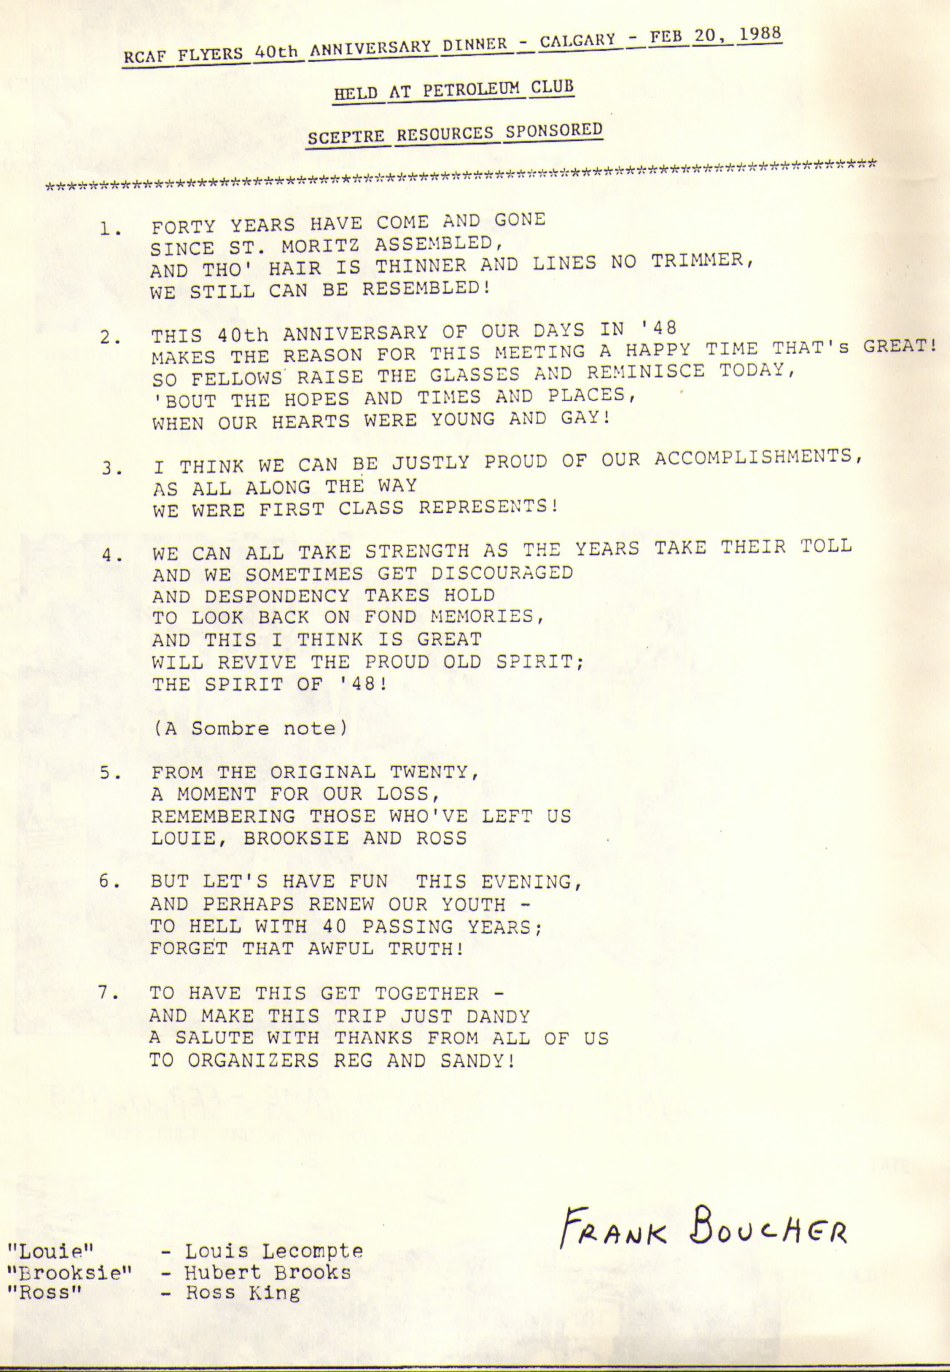 Image of 40th RCAF Flyer Anniversary Poem by Frank Boucher 